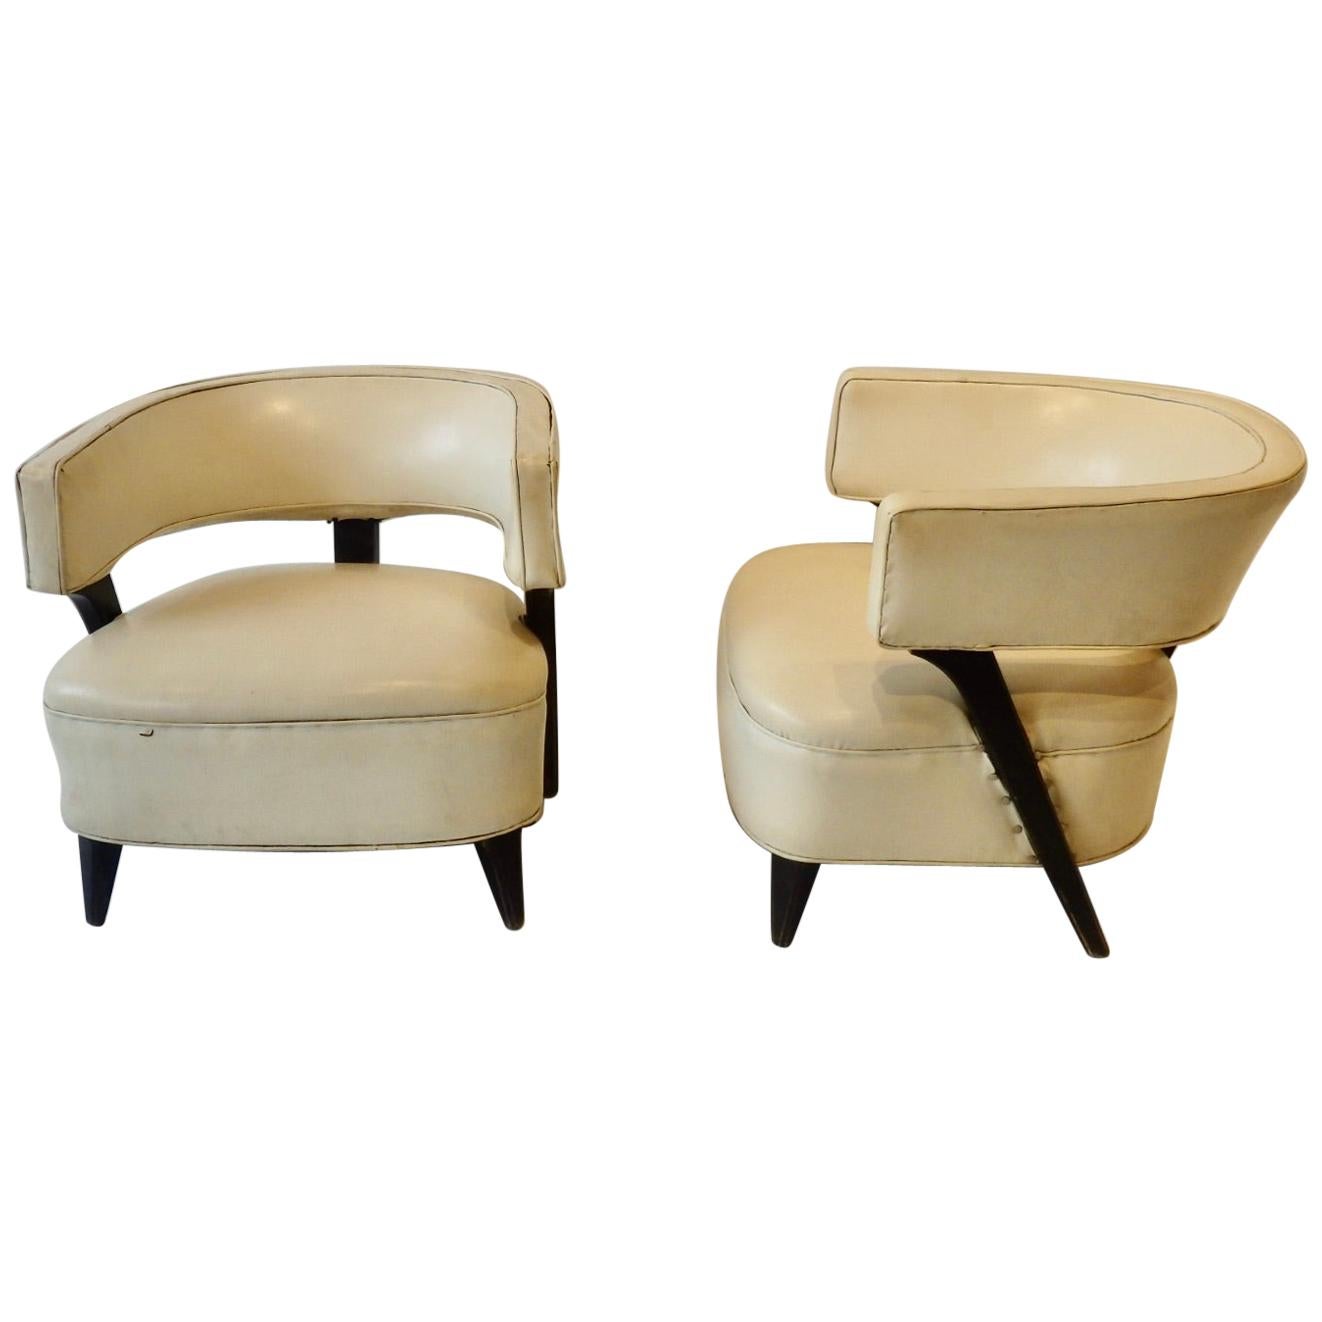 Pair of as Found Paul Laszlo Style Art Deco Moderne Club or Lounge Chairs